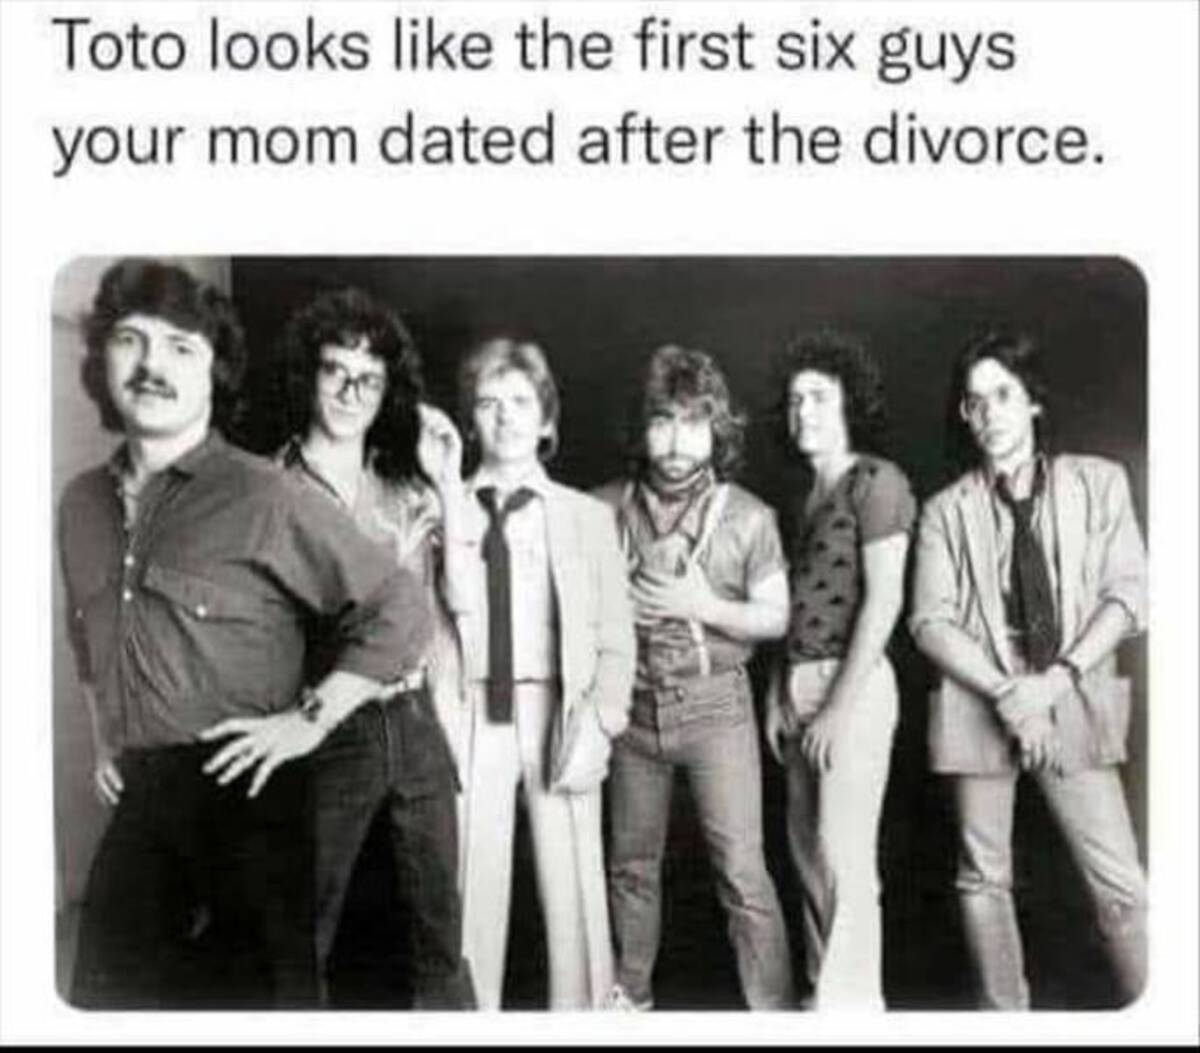 toto band - Toto looks the first six guys your mom dated after the divorce.